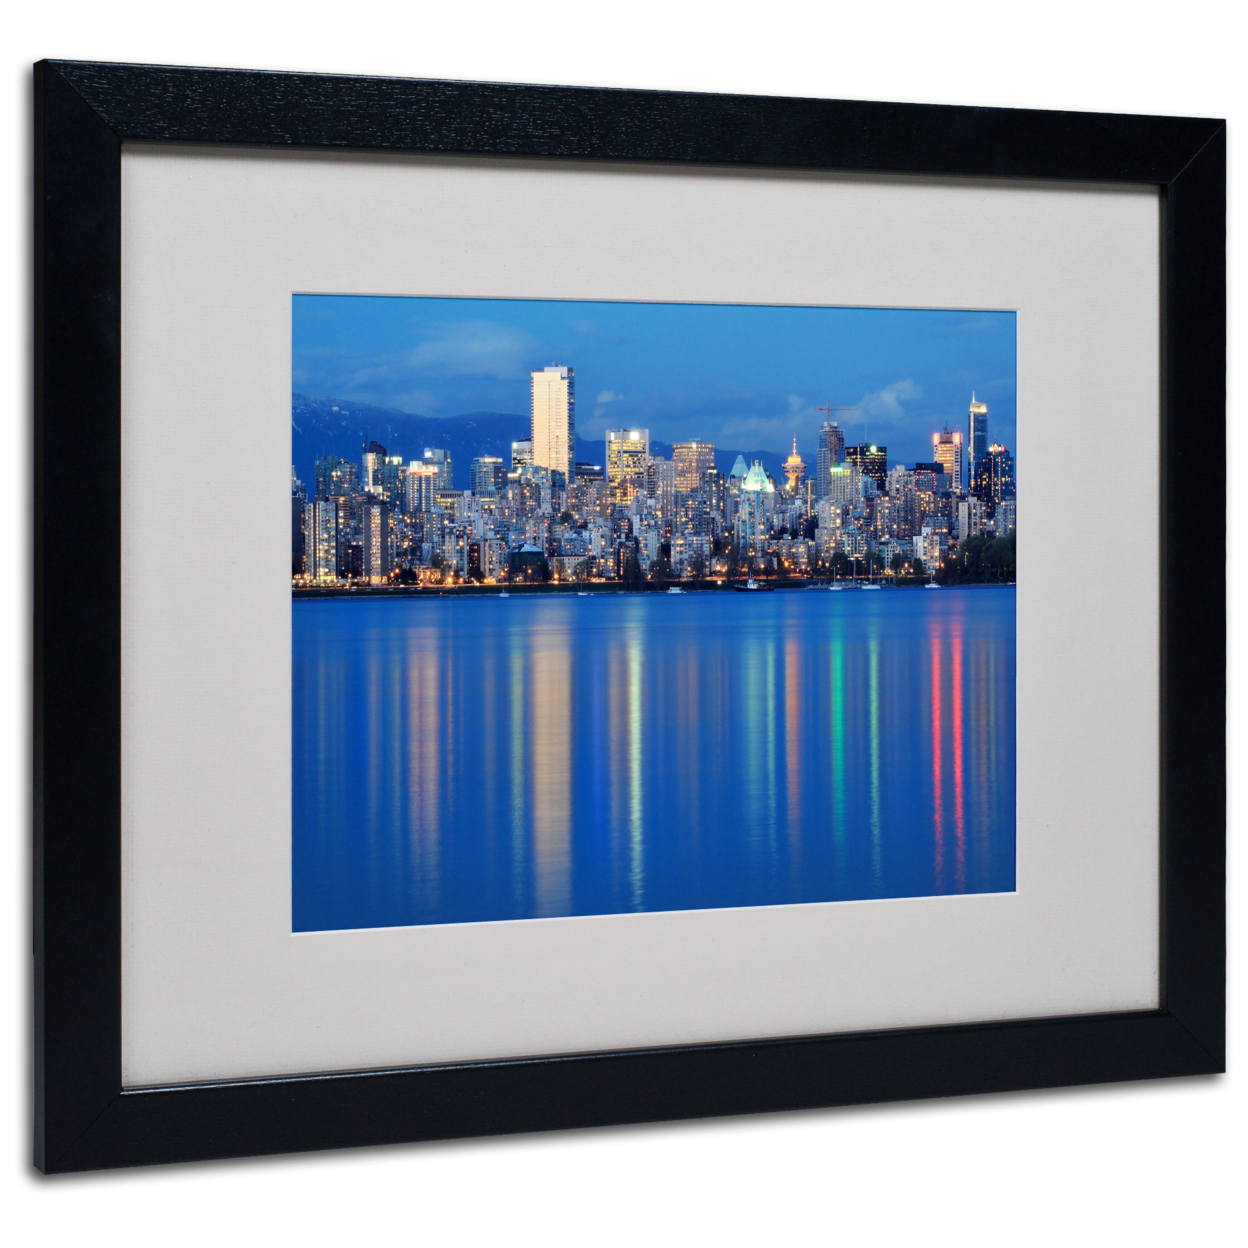 Pierre Leclerc 'Vancouver City' Black Wooden Framed Art 18 X 22 Inches